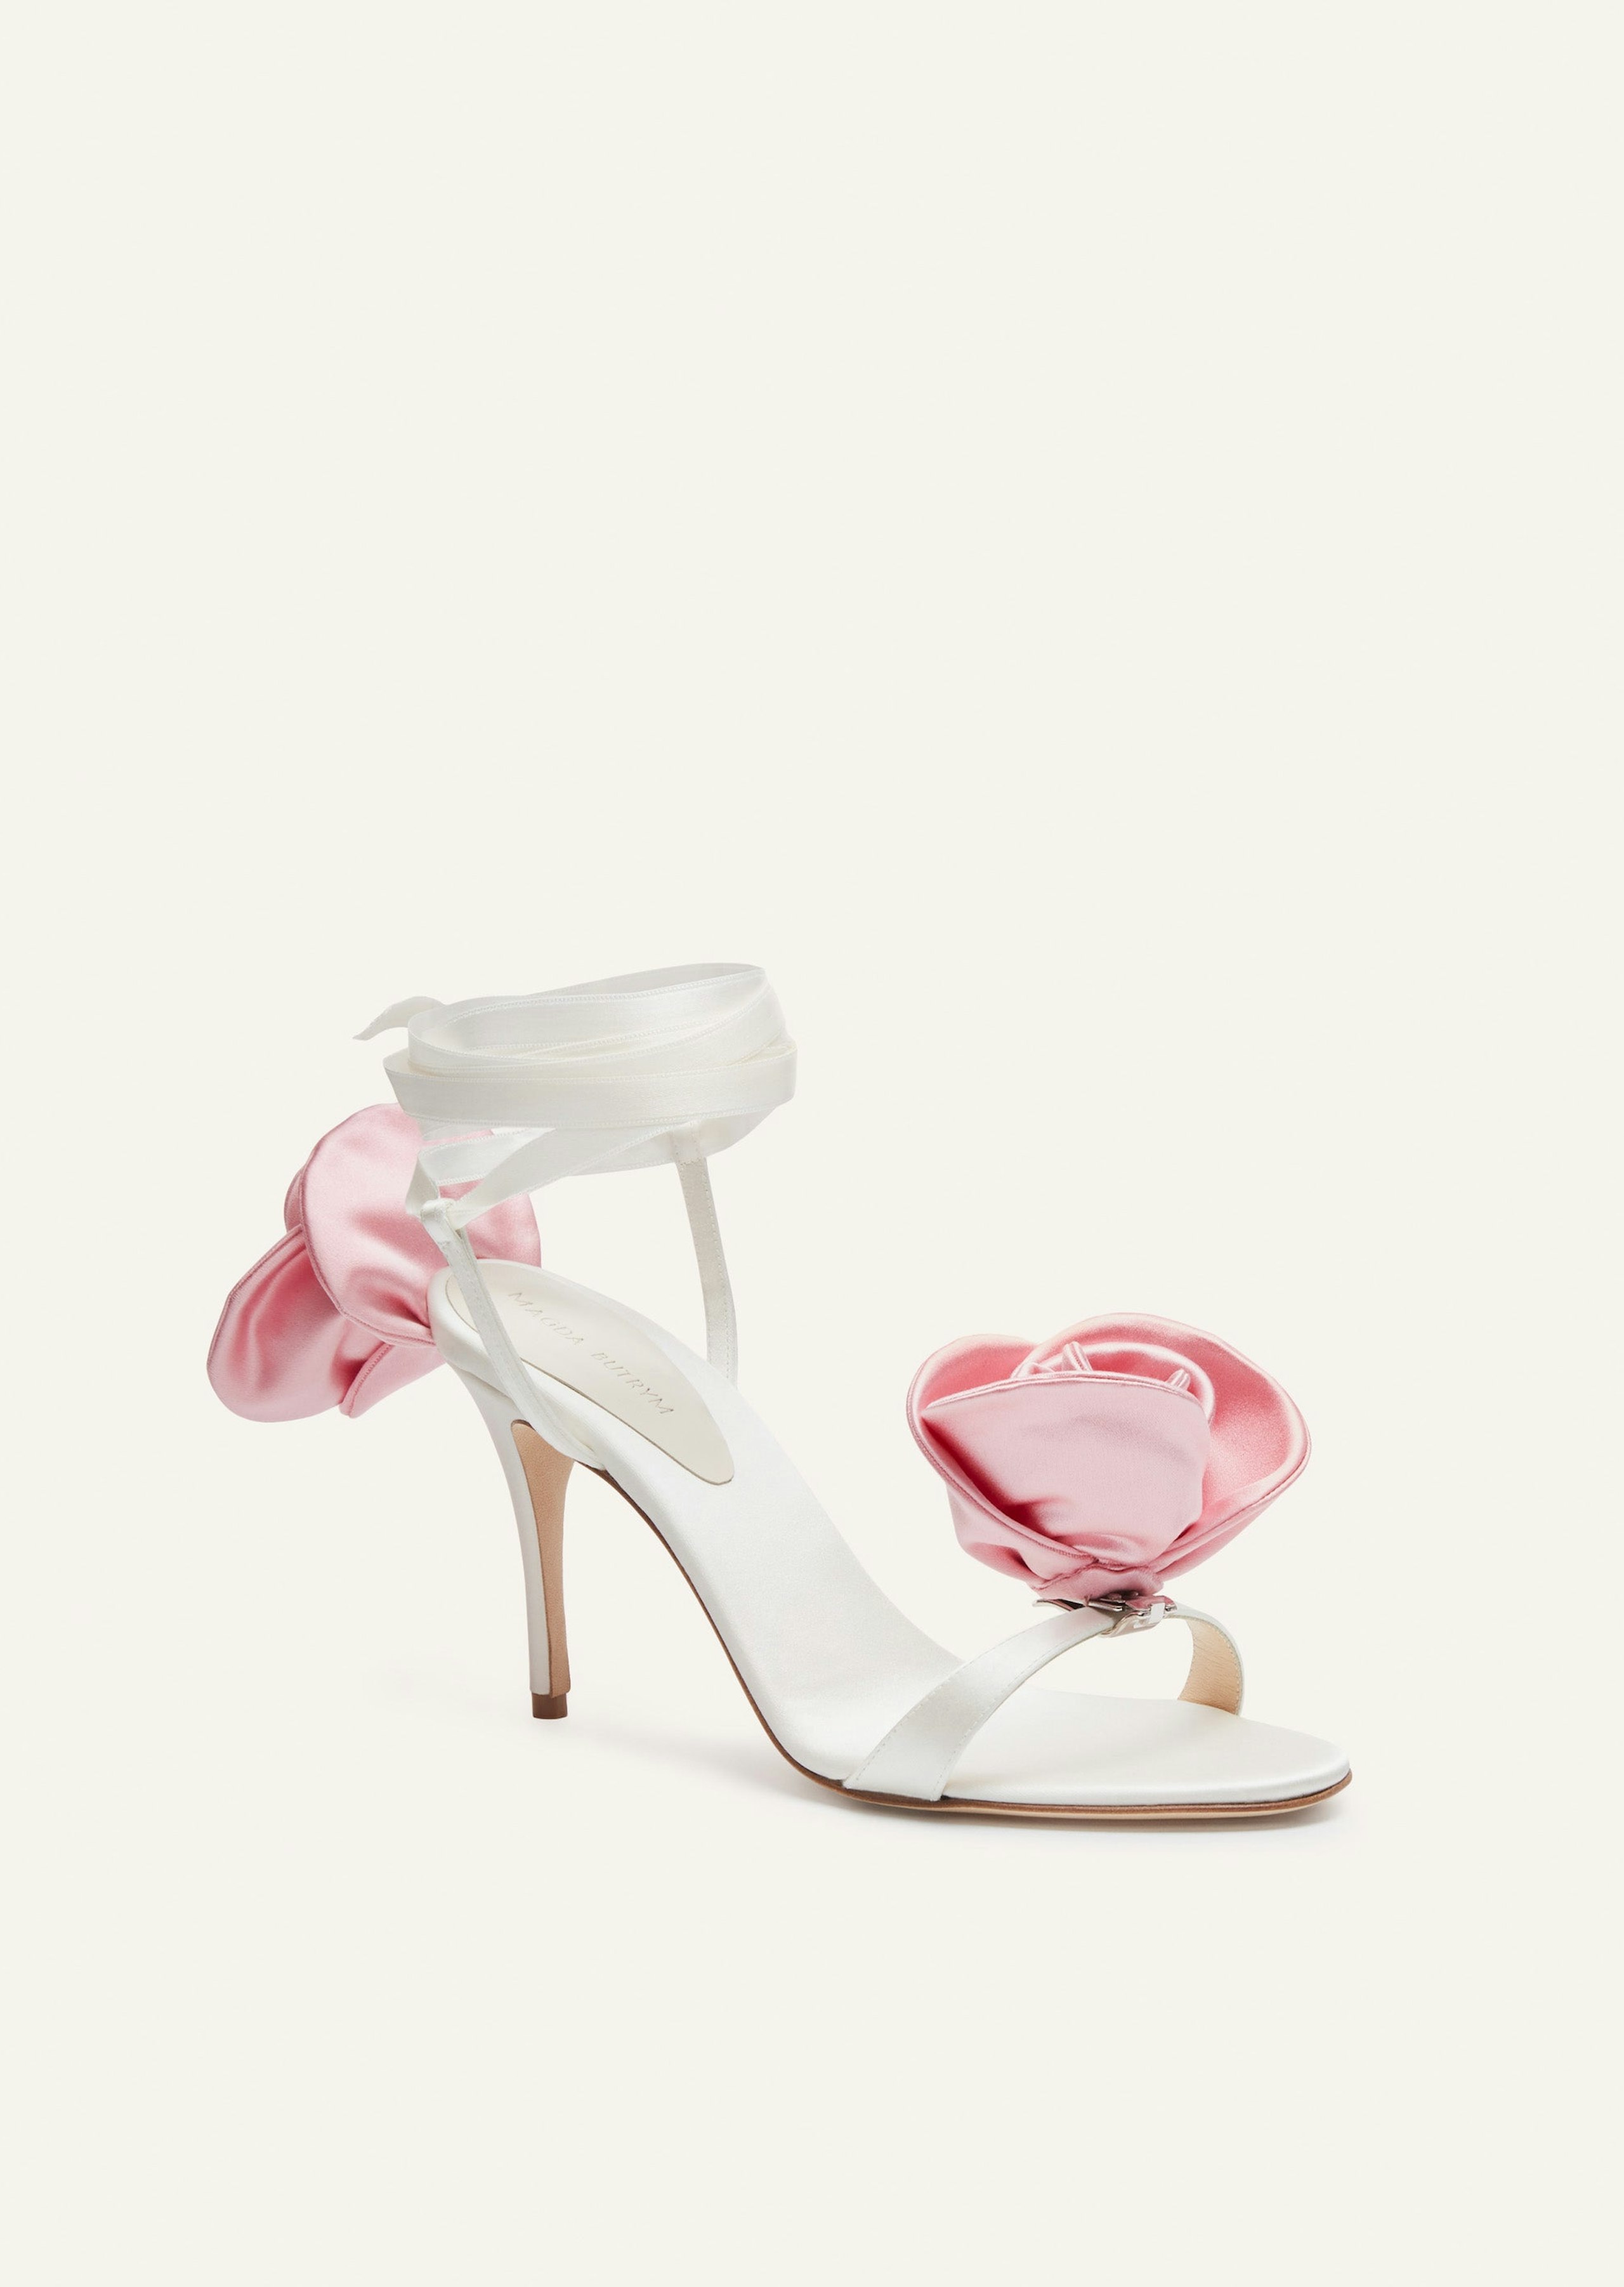 AW23 FLOWER SHOES SATIN CREAM PINK 9